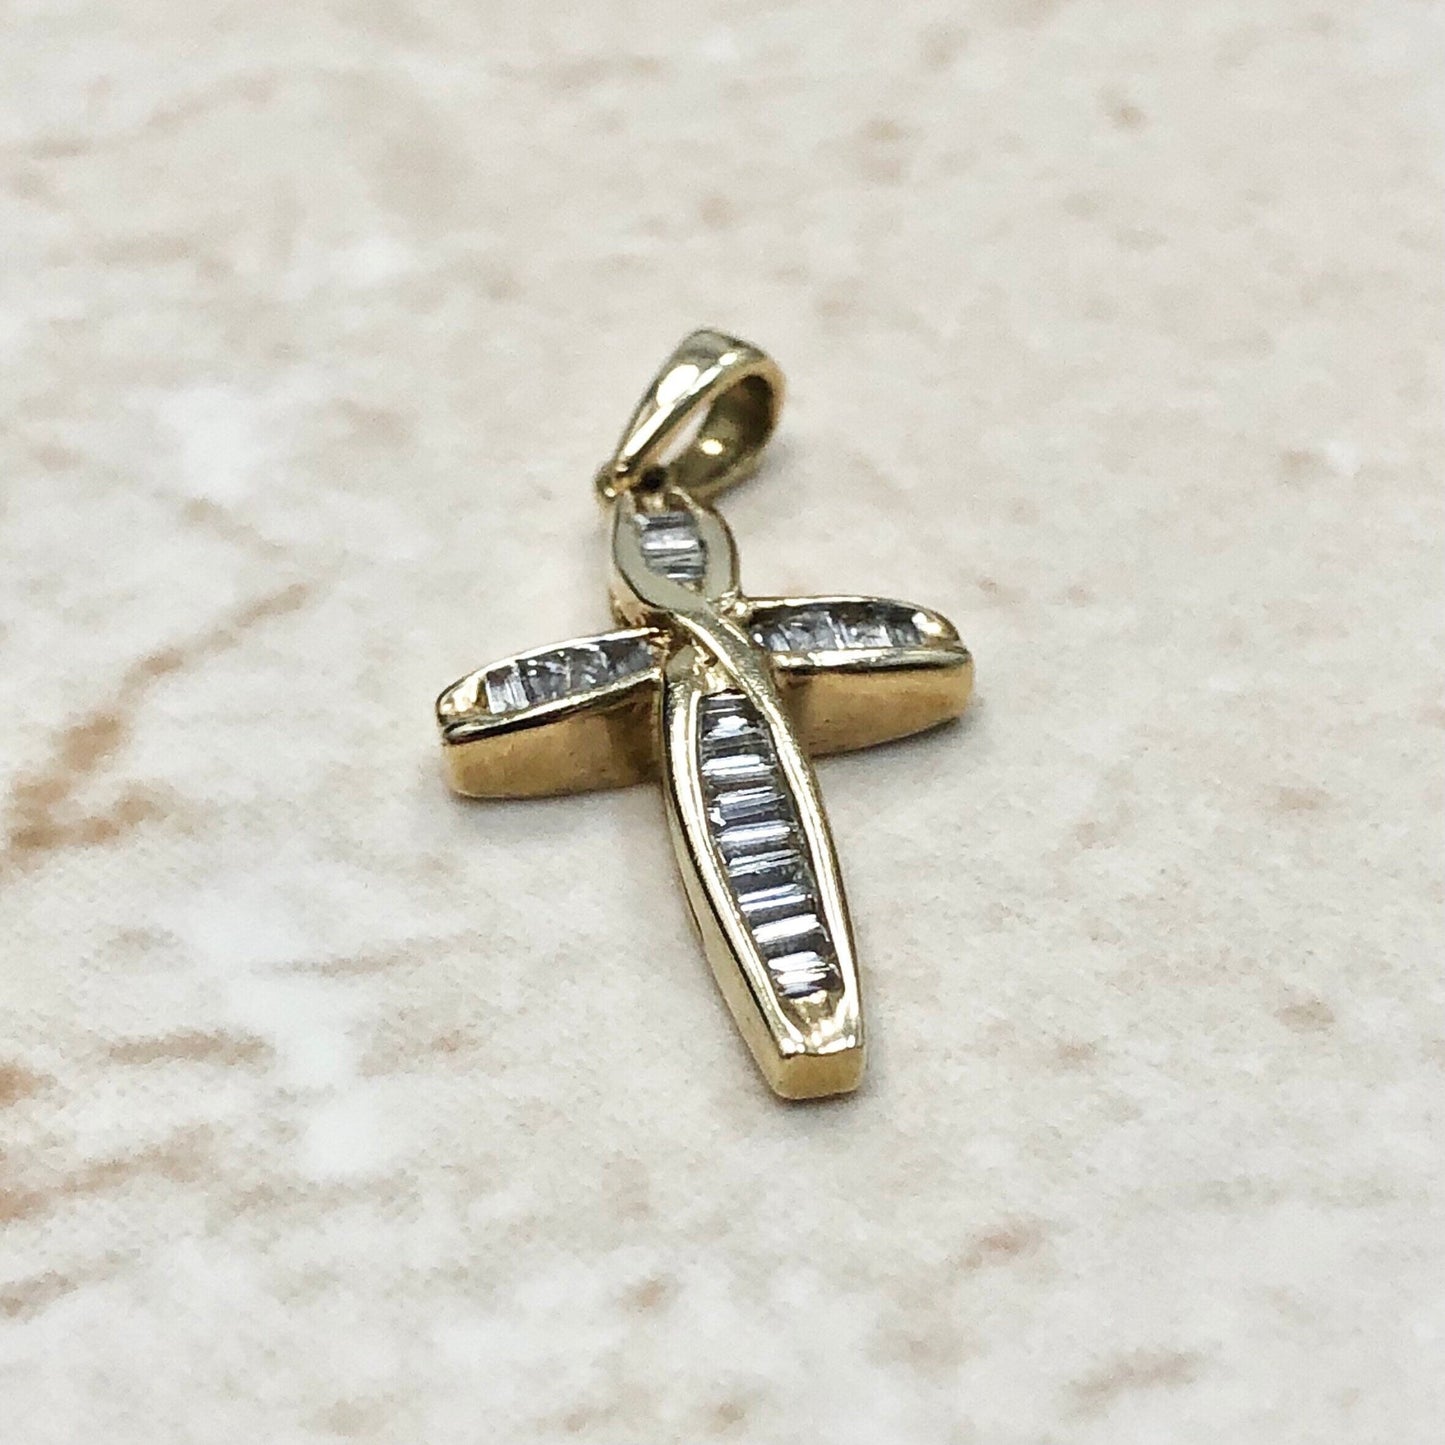 Vintage 10K Diamond Cross Pendant Necklace - Yellow Gold Diamond Pendant - Religious Jewelry - Best Gifts For Her - Christmas Gifts